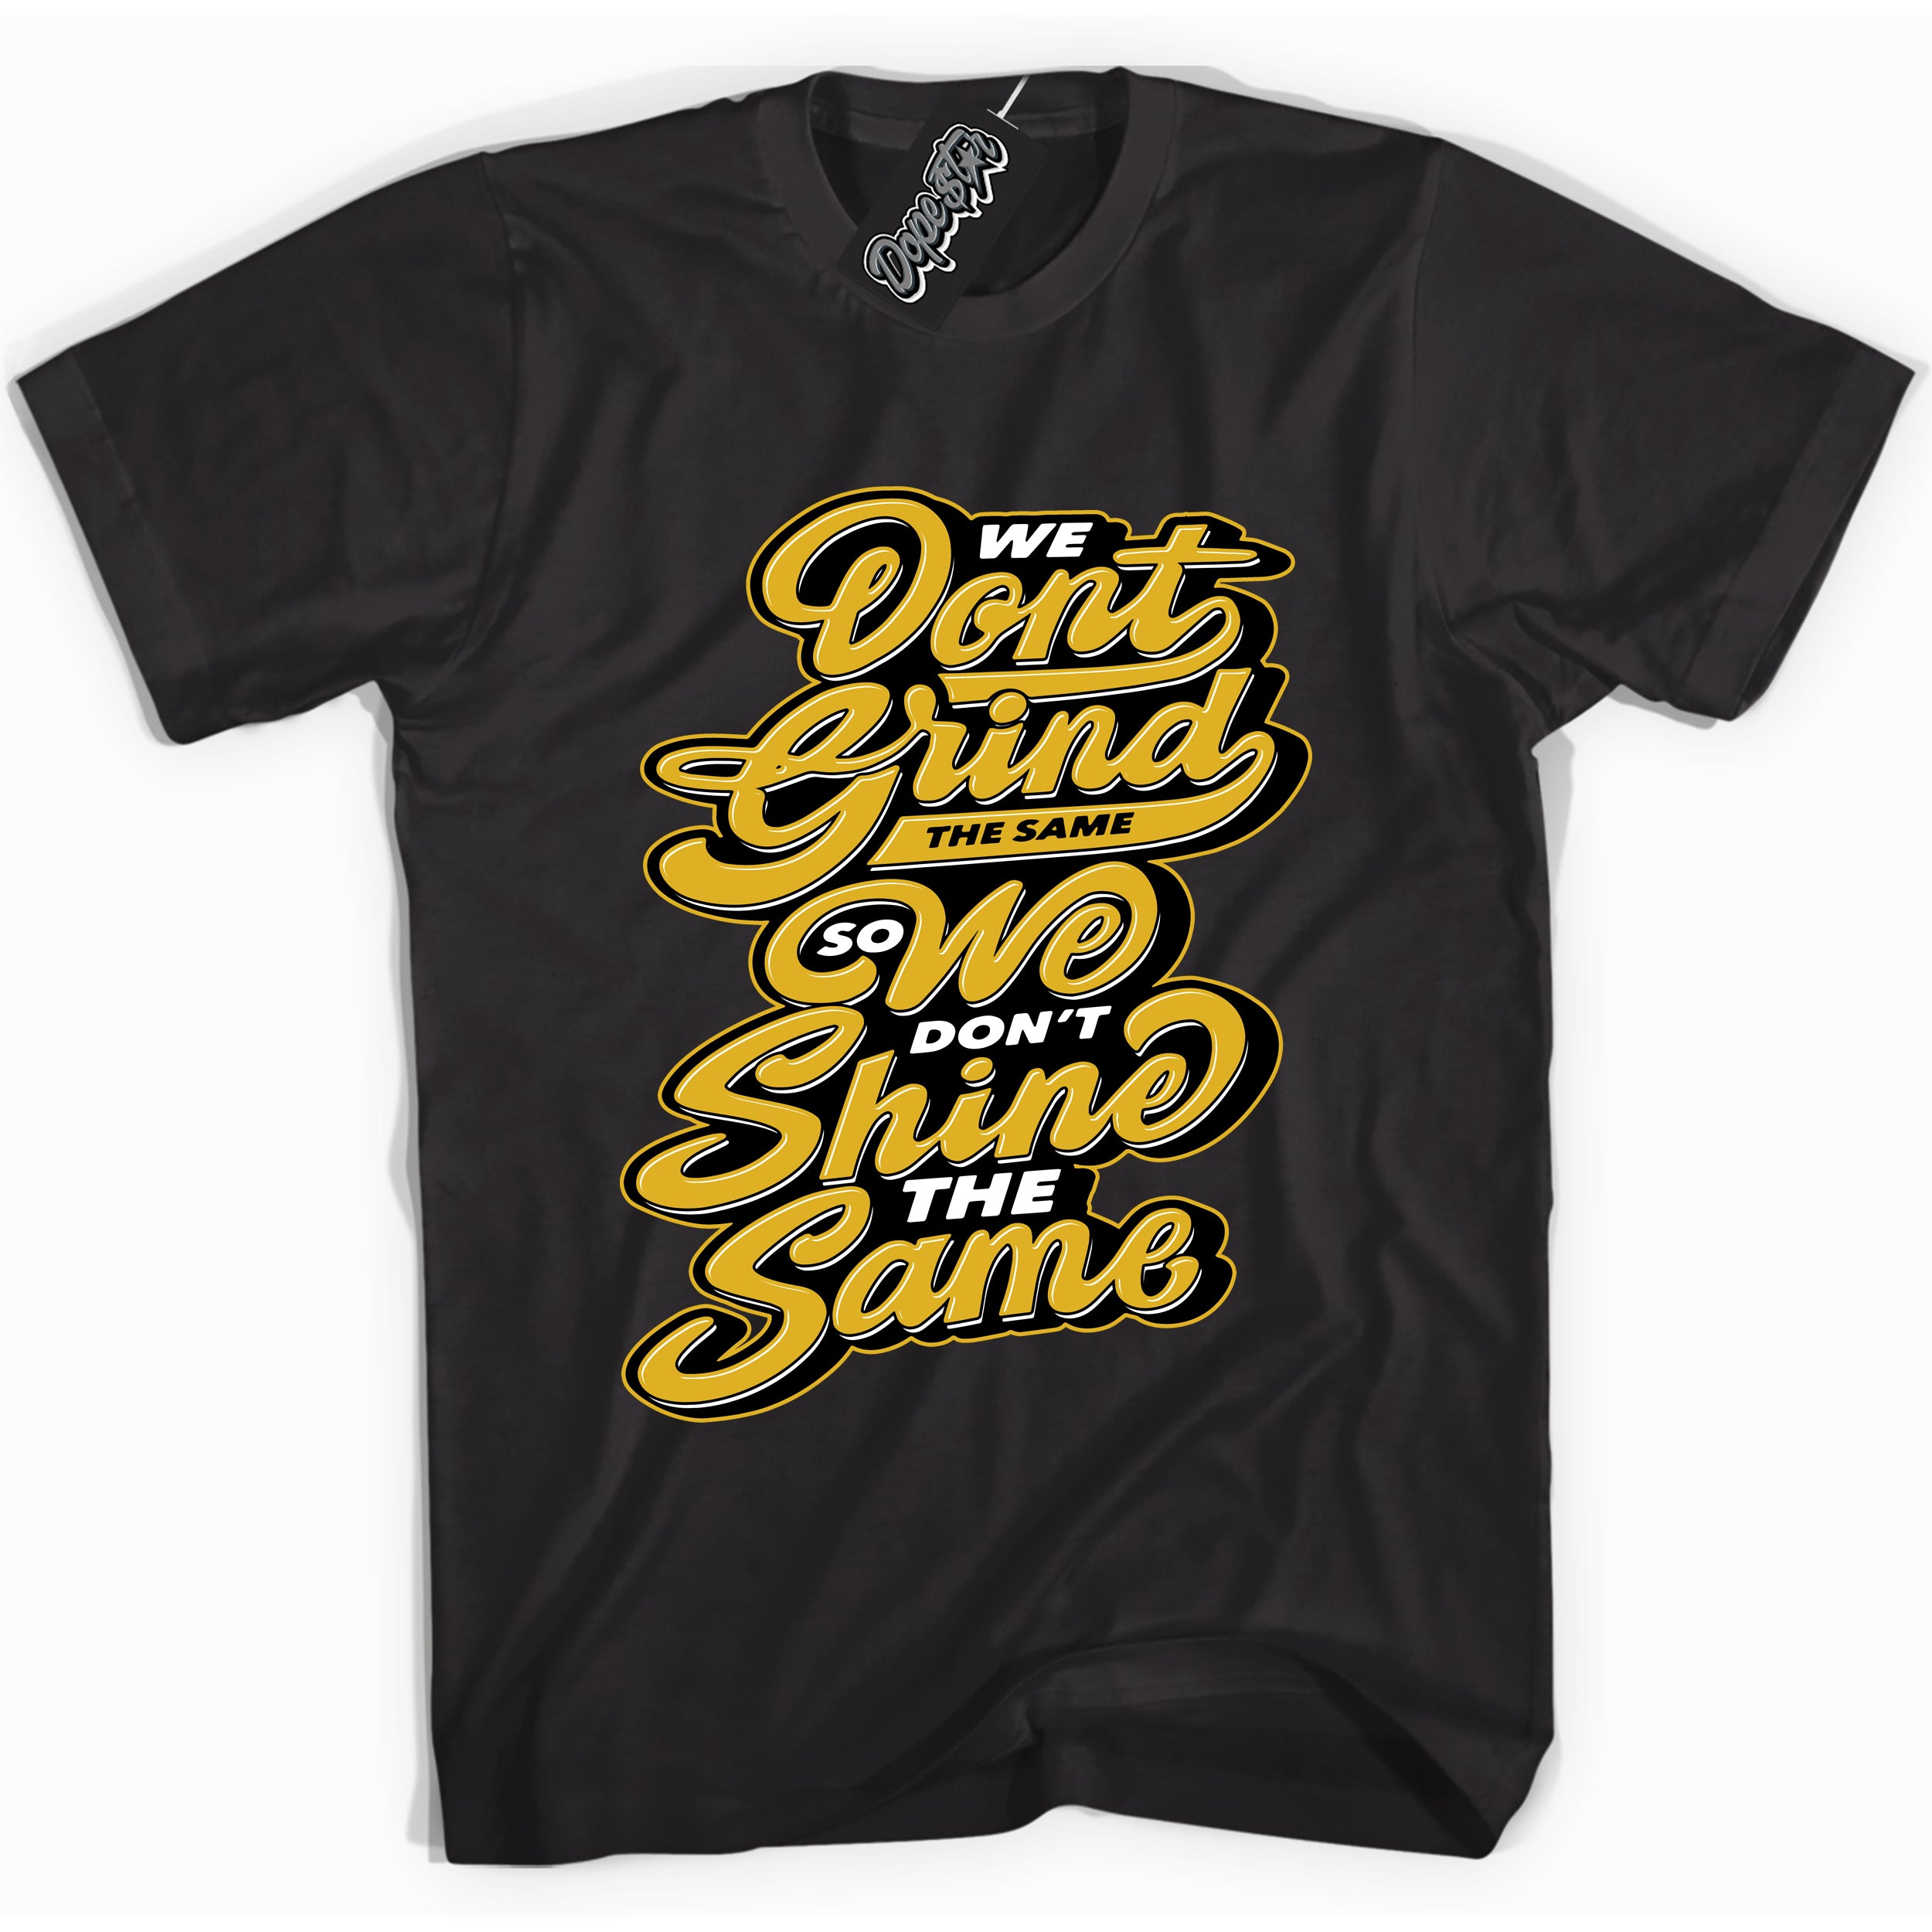 Cool Black Shirt with “ Grind Shine” design that perfectly matches Yellow Ochre 6s Sneakers.